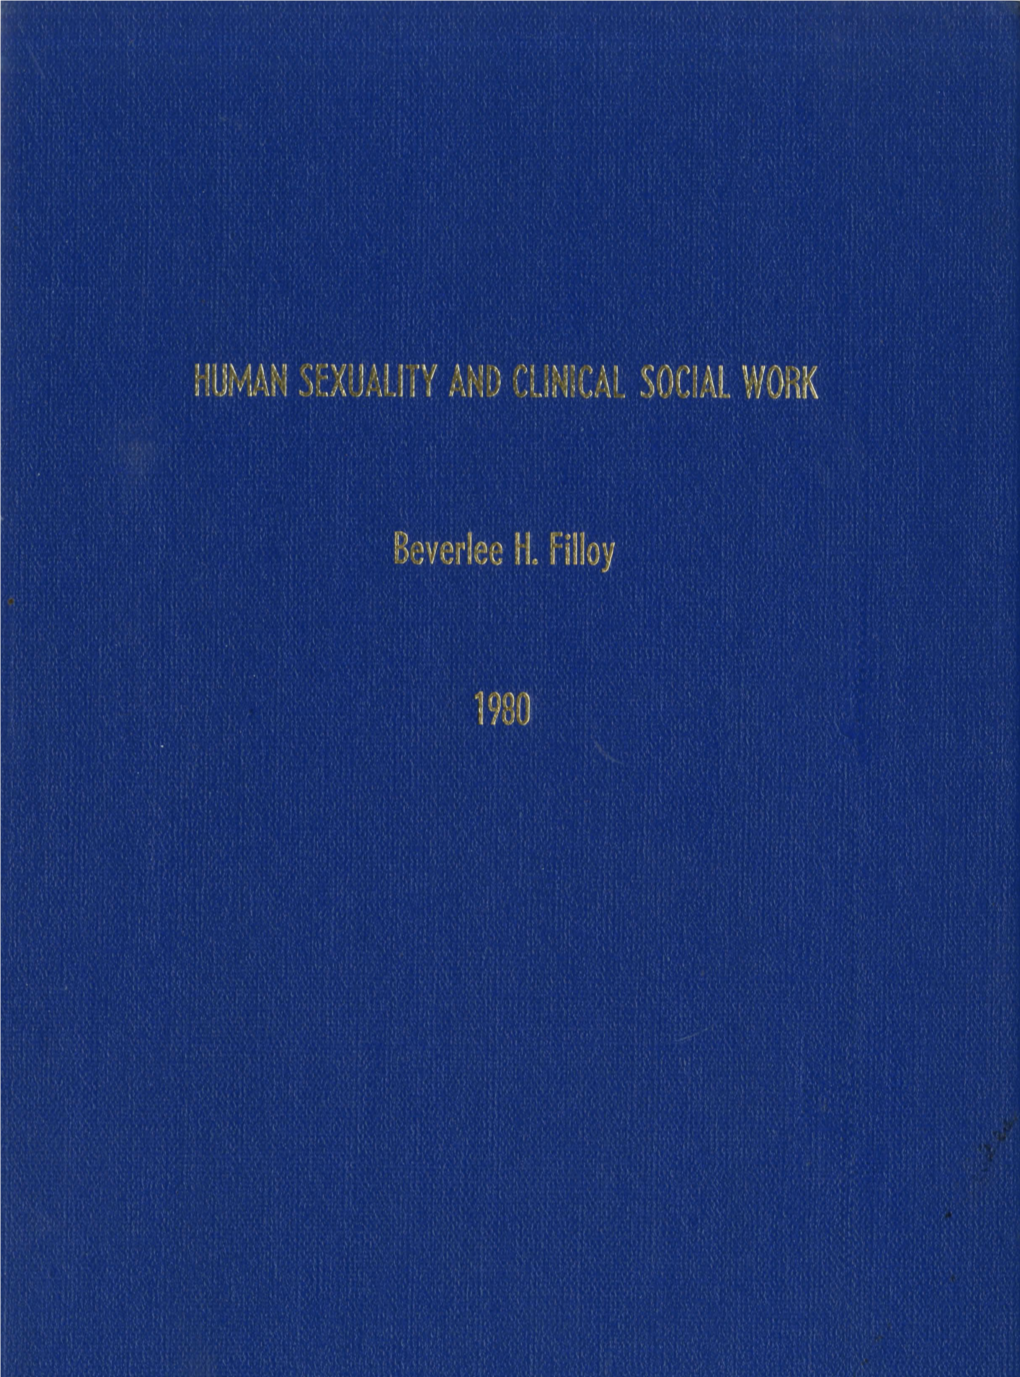 Human Sexuality and Clinical Social Work